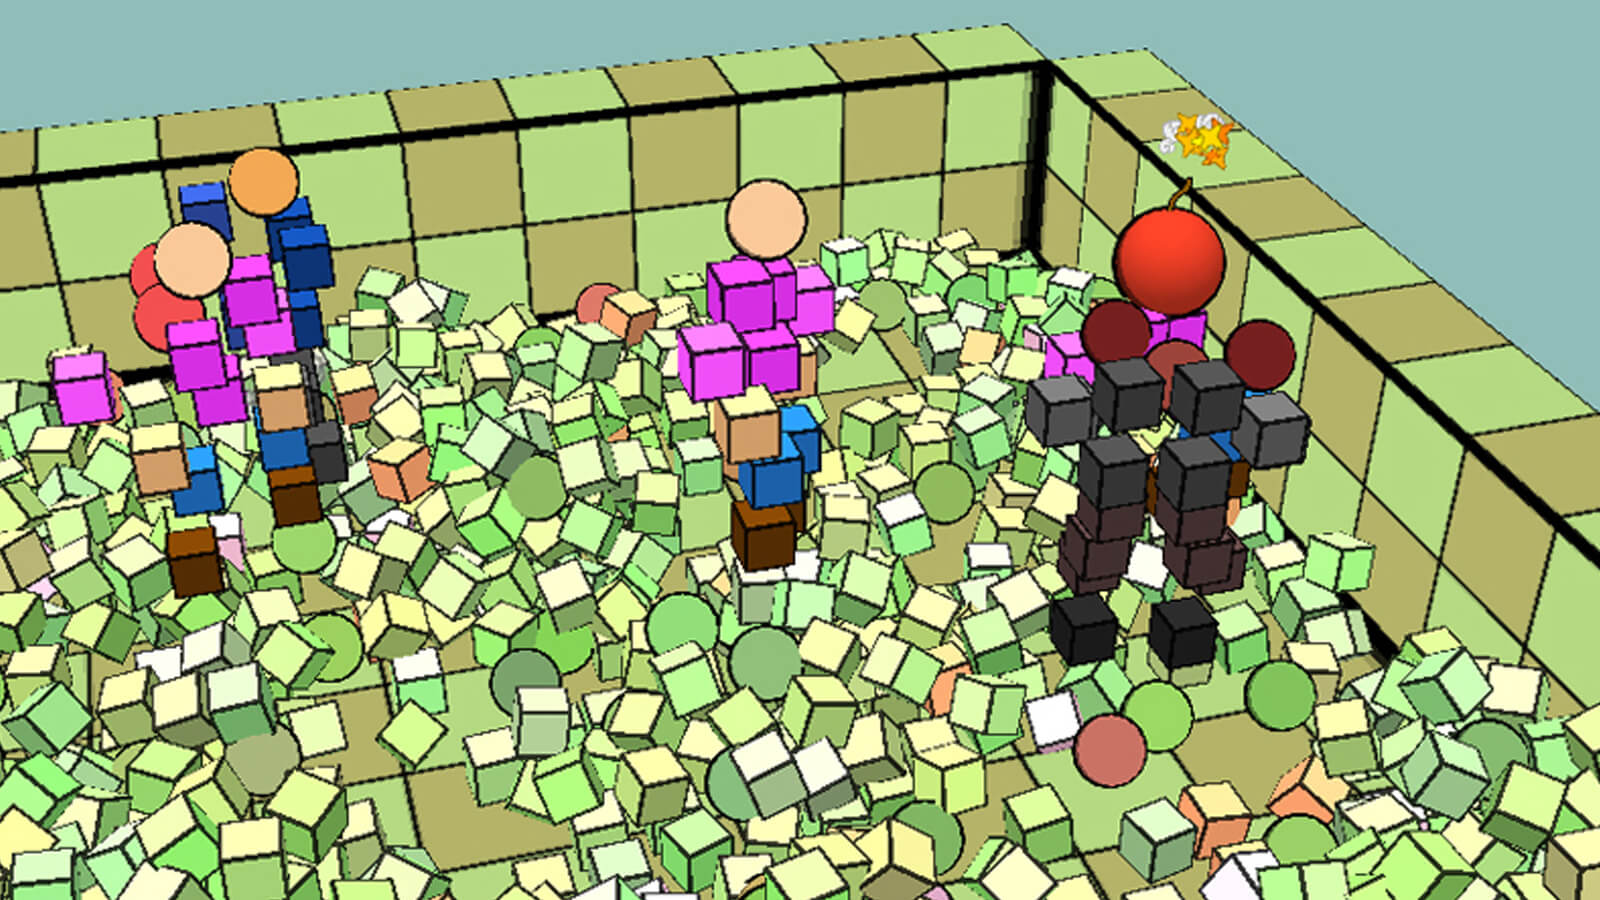 Three geometric people stand in a room littered with cubes.